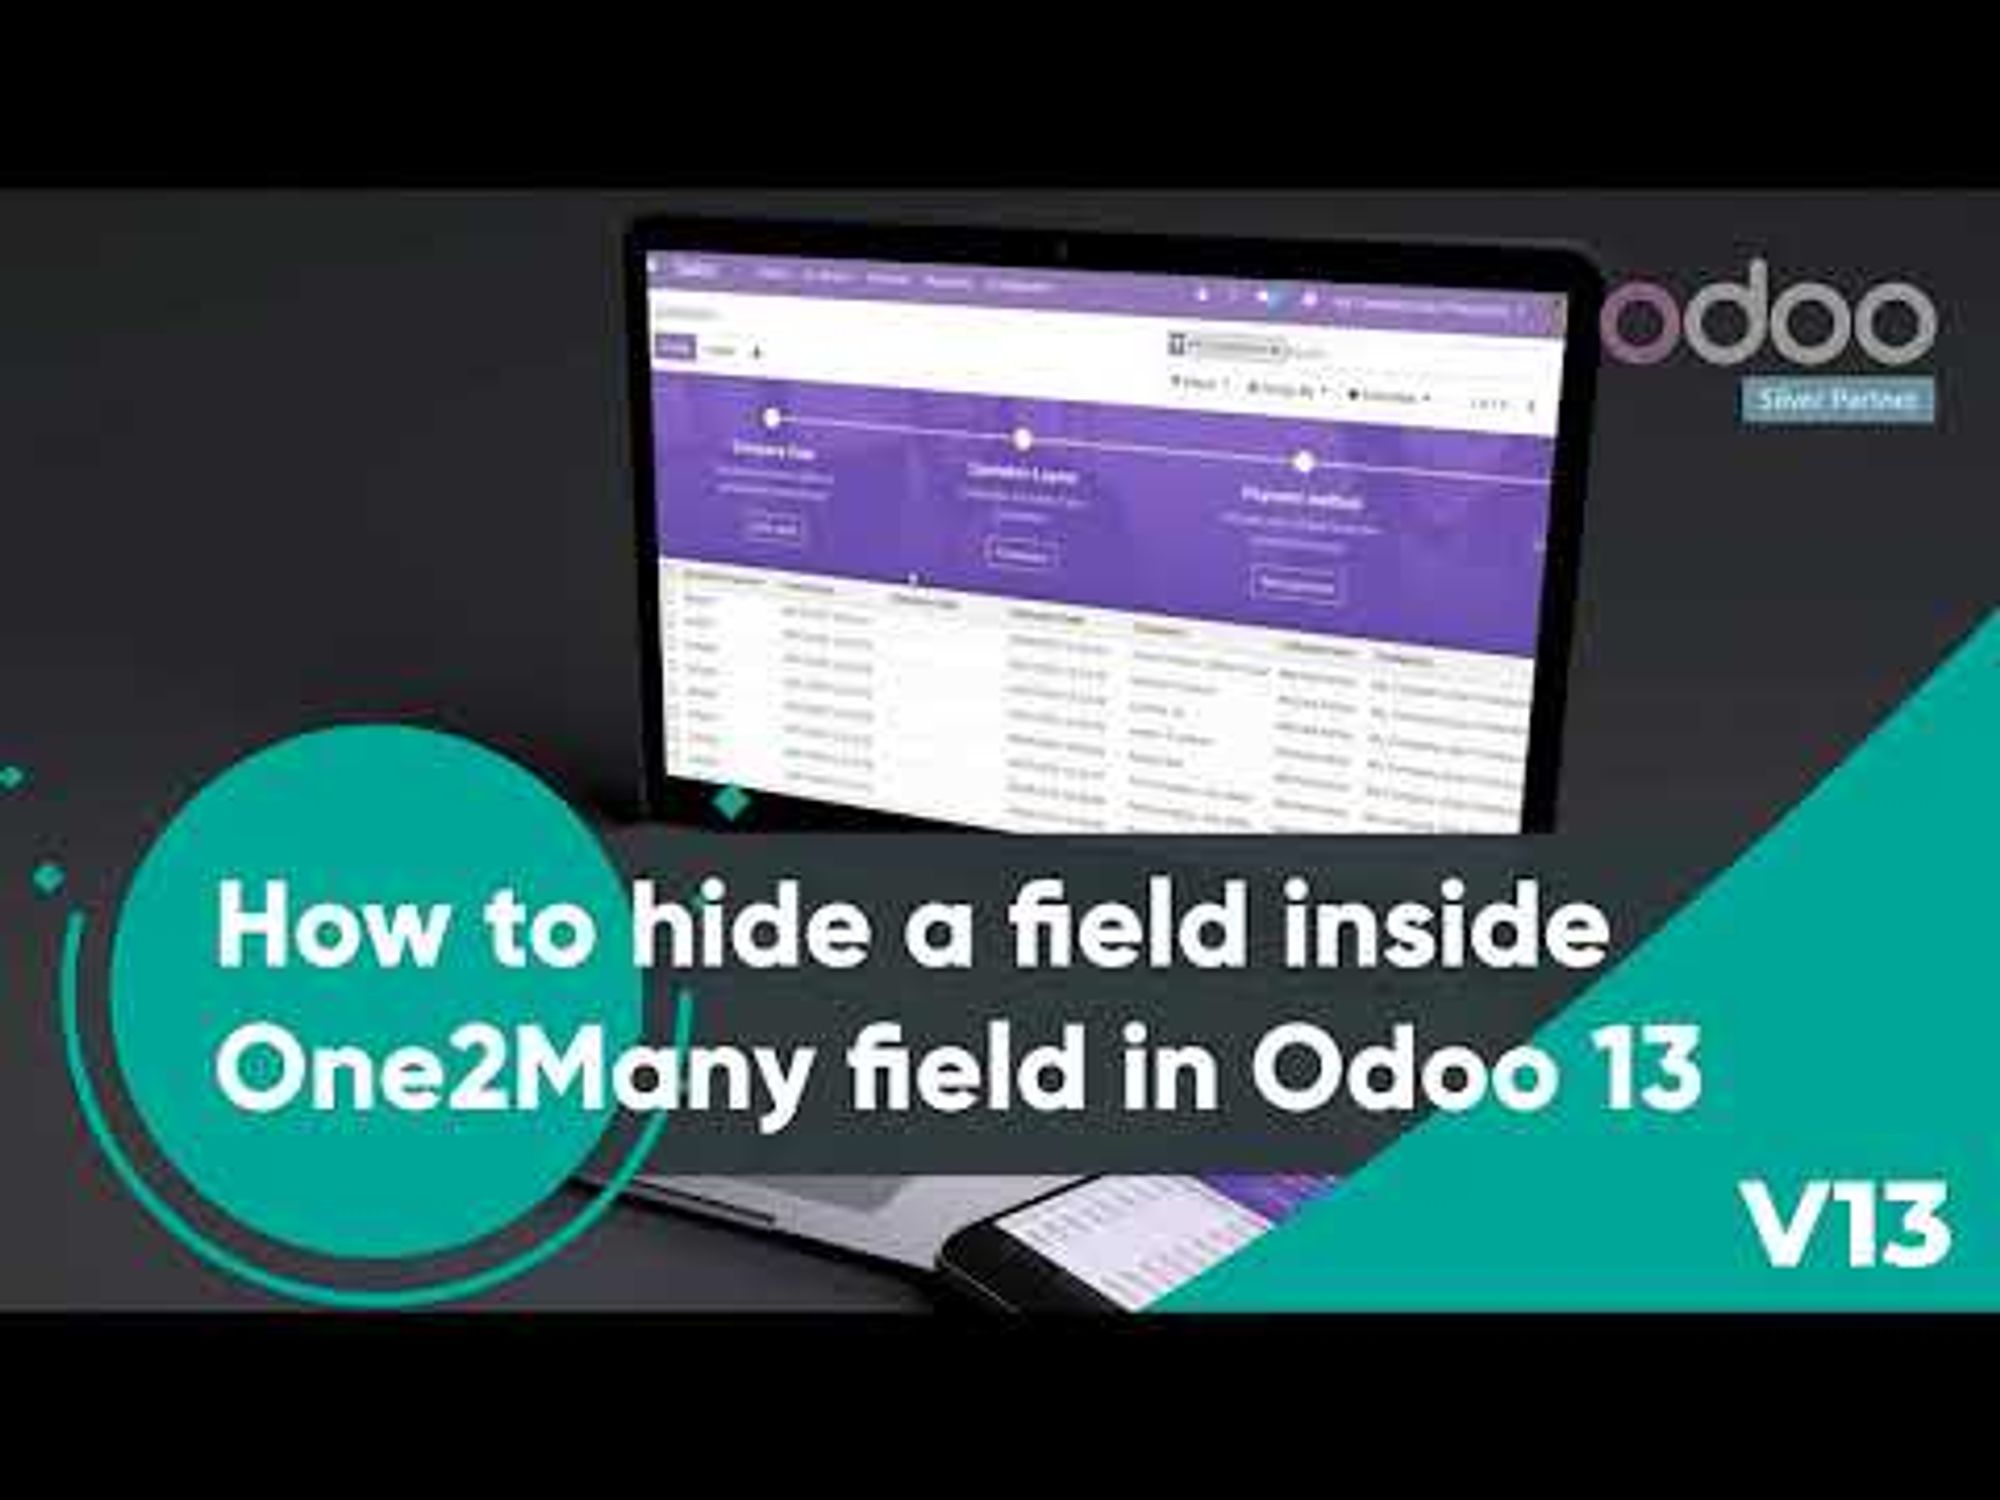 How to hide a new or existing field inside a One2Many fields in Odoo 13?